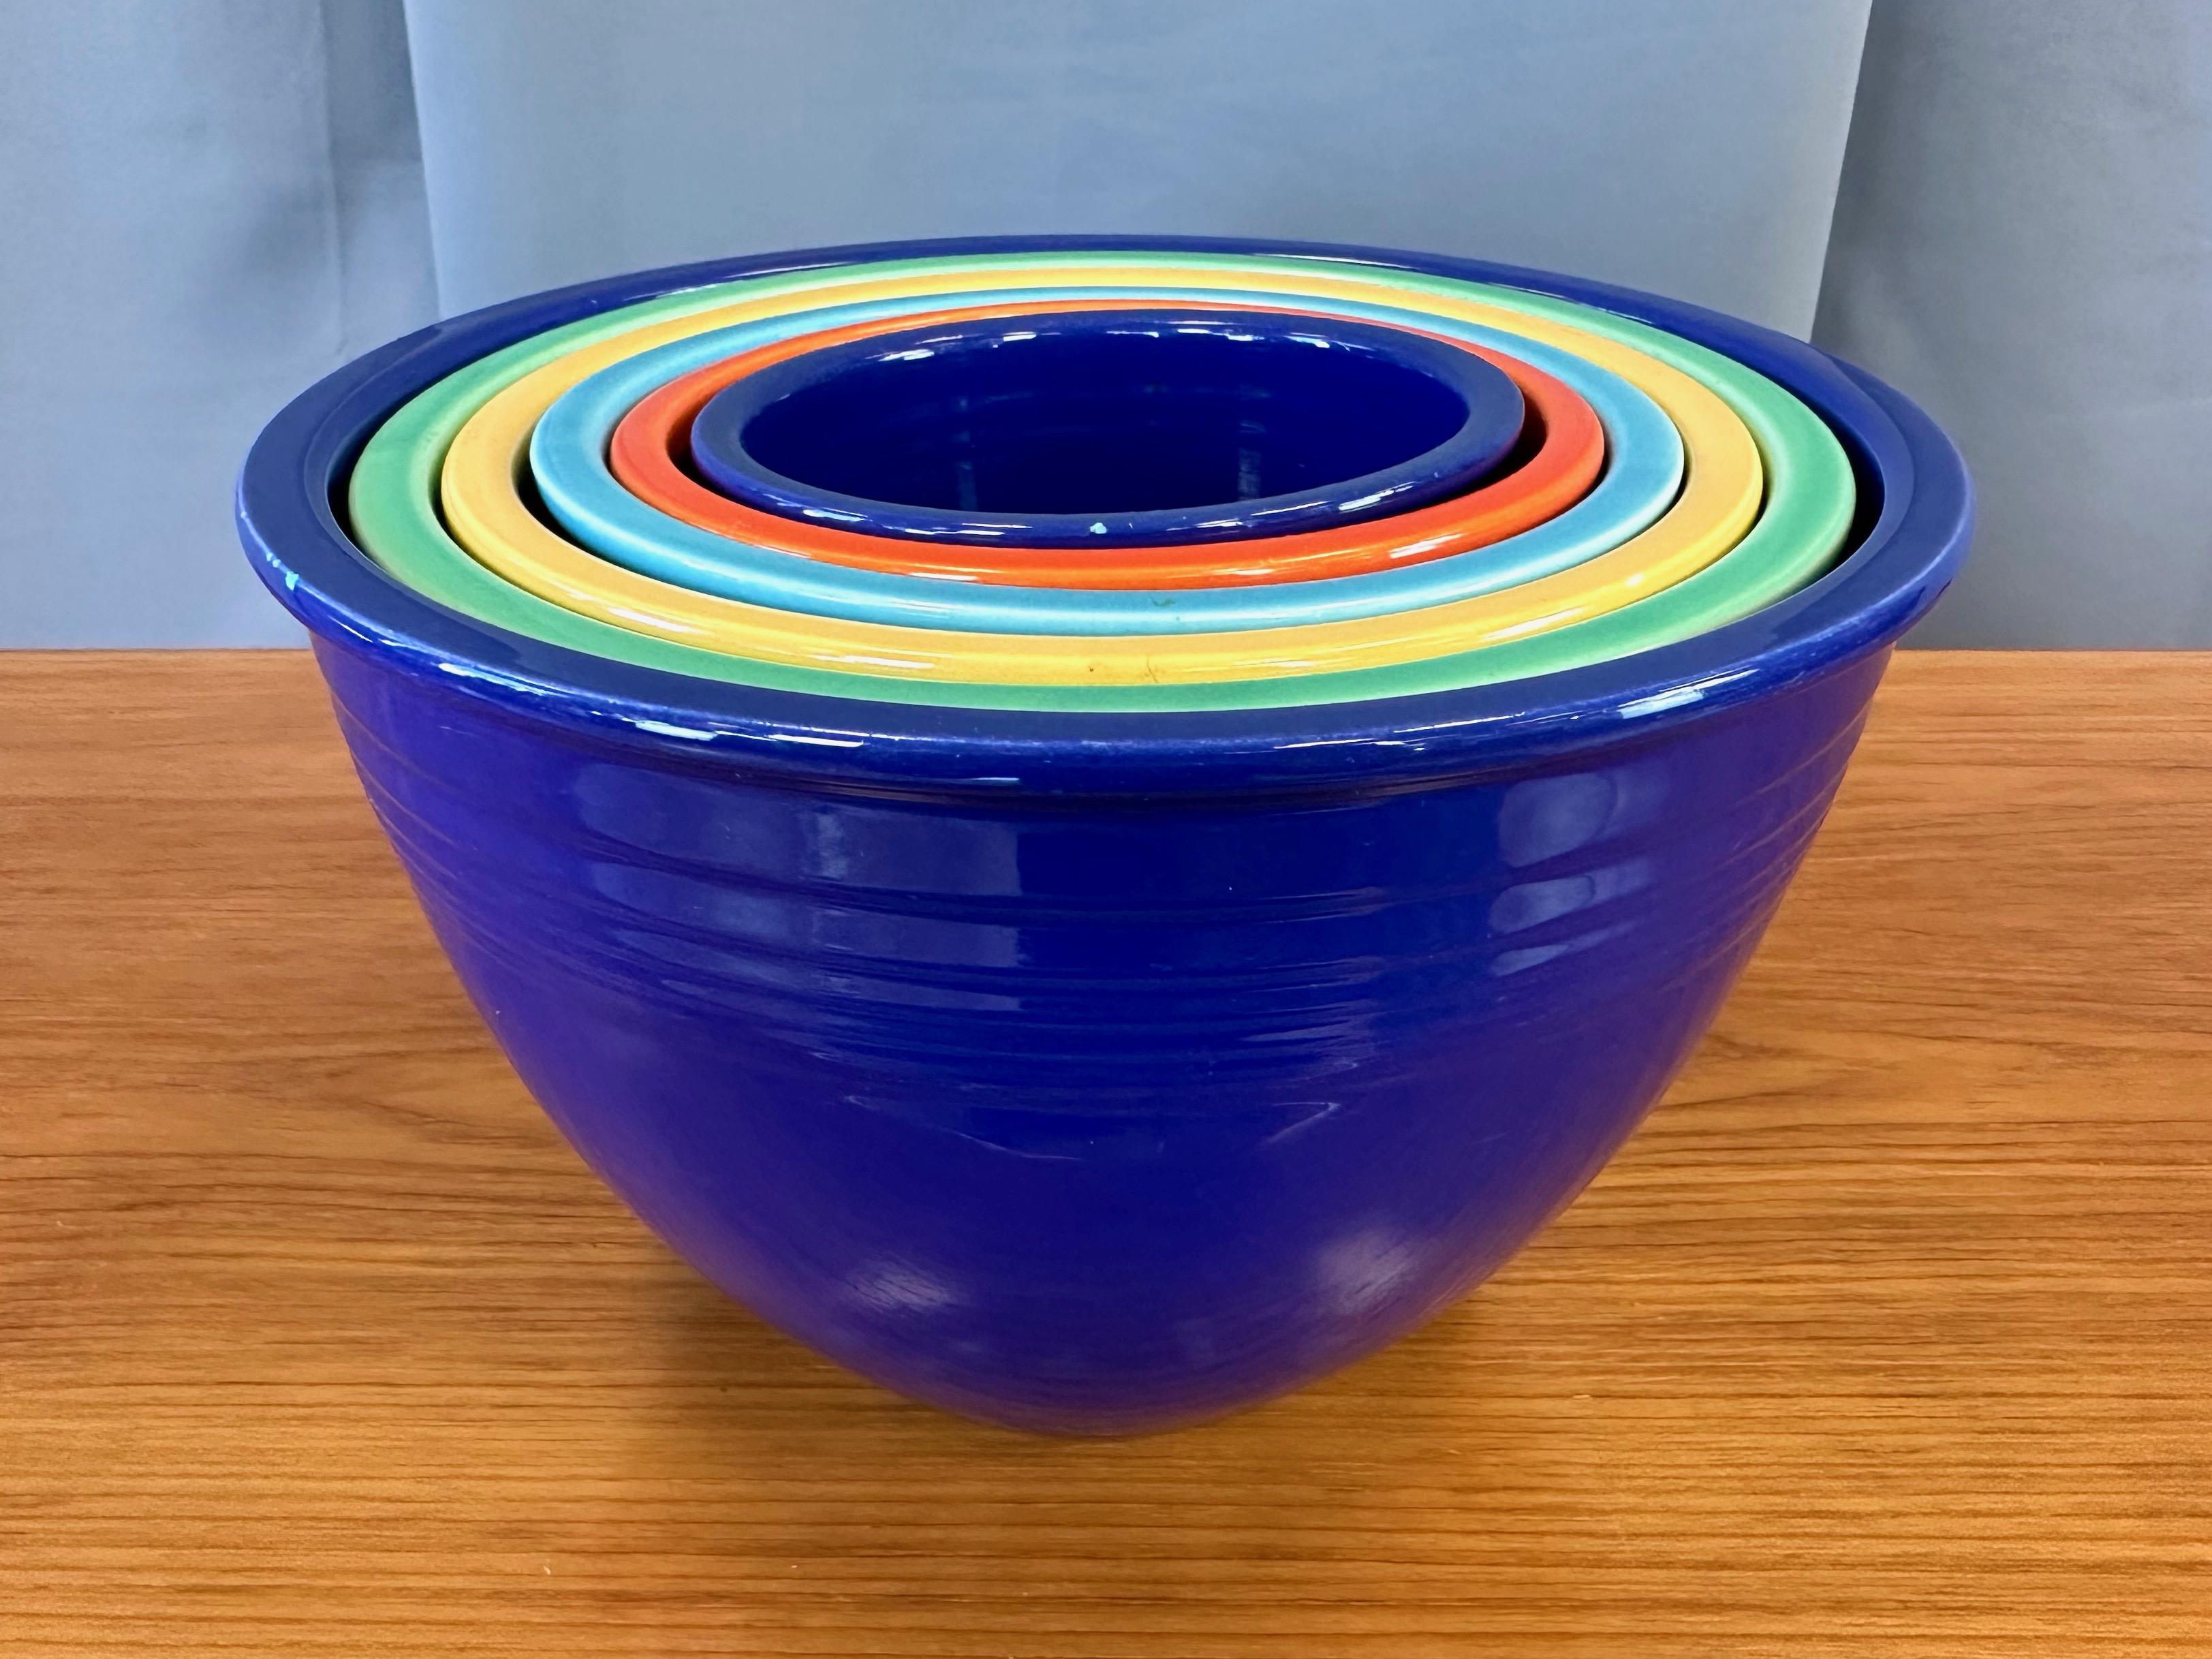 A delightfully colorful circa 1940 six-piece set of early production Fiesta—commonly known as Fiestaware—nesting mixing bowls by the Homer Laughlin Company of West Virginia.

Features a rainbow-like array of original colors introduced in the